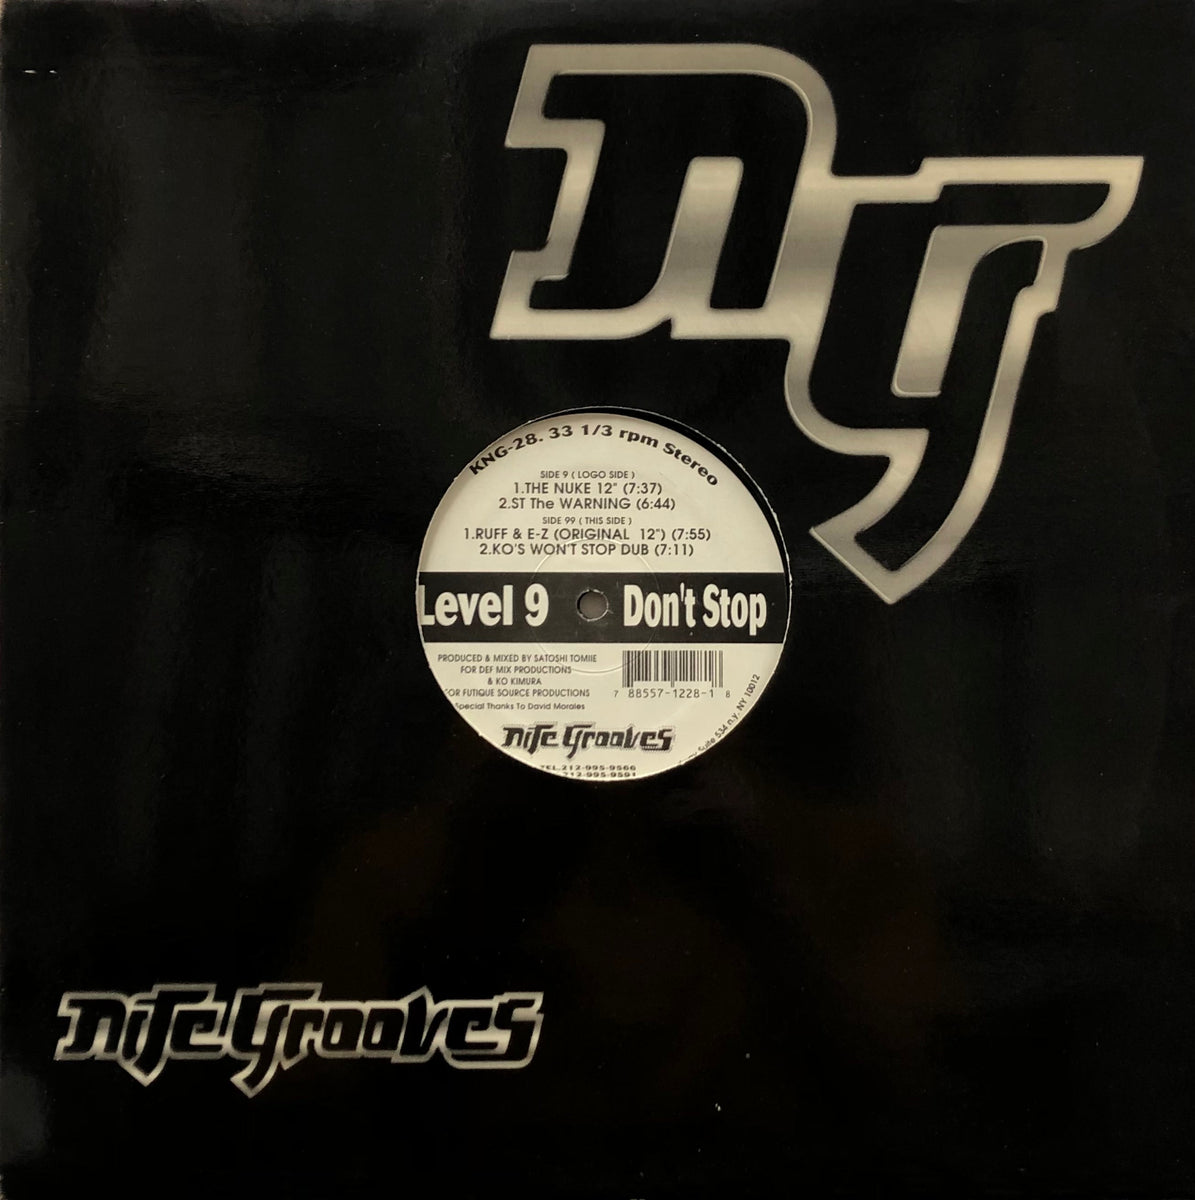 LEVEL 9 / Don't Stop (Nite Grooves, KNG-28, 12inch) – TICRO MARKET